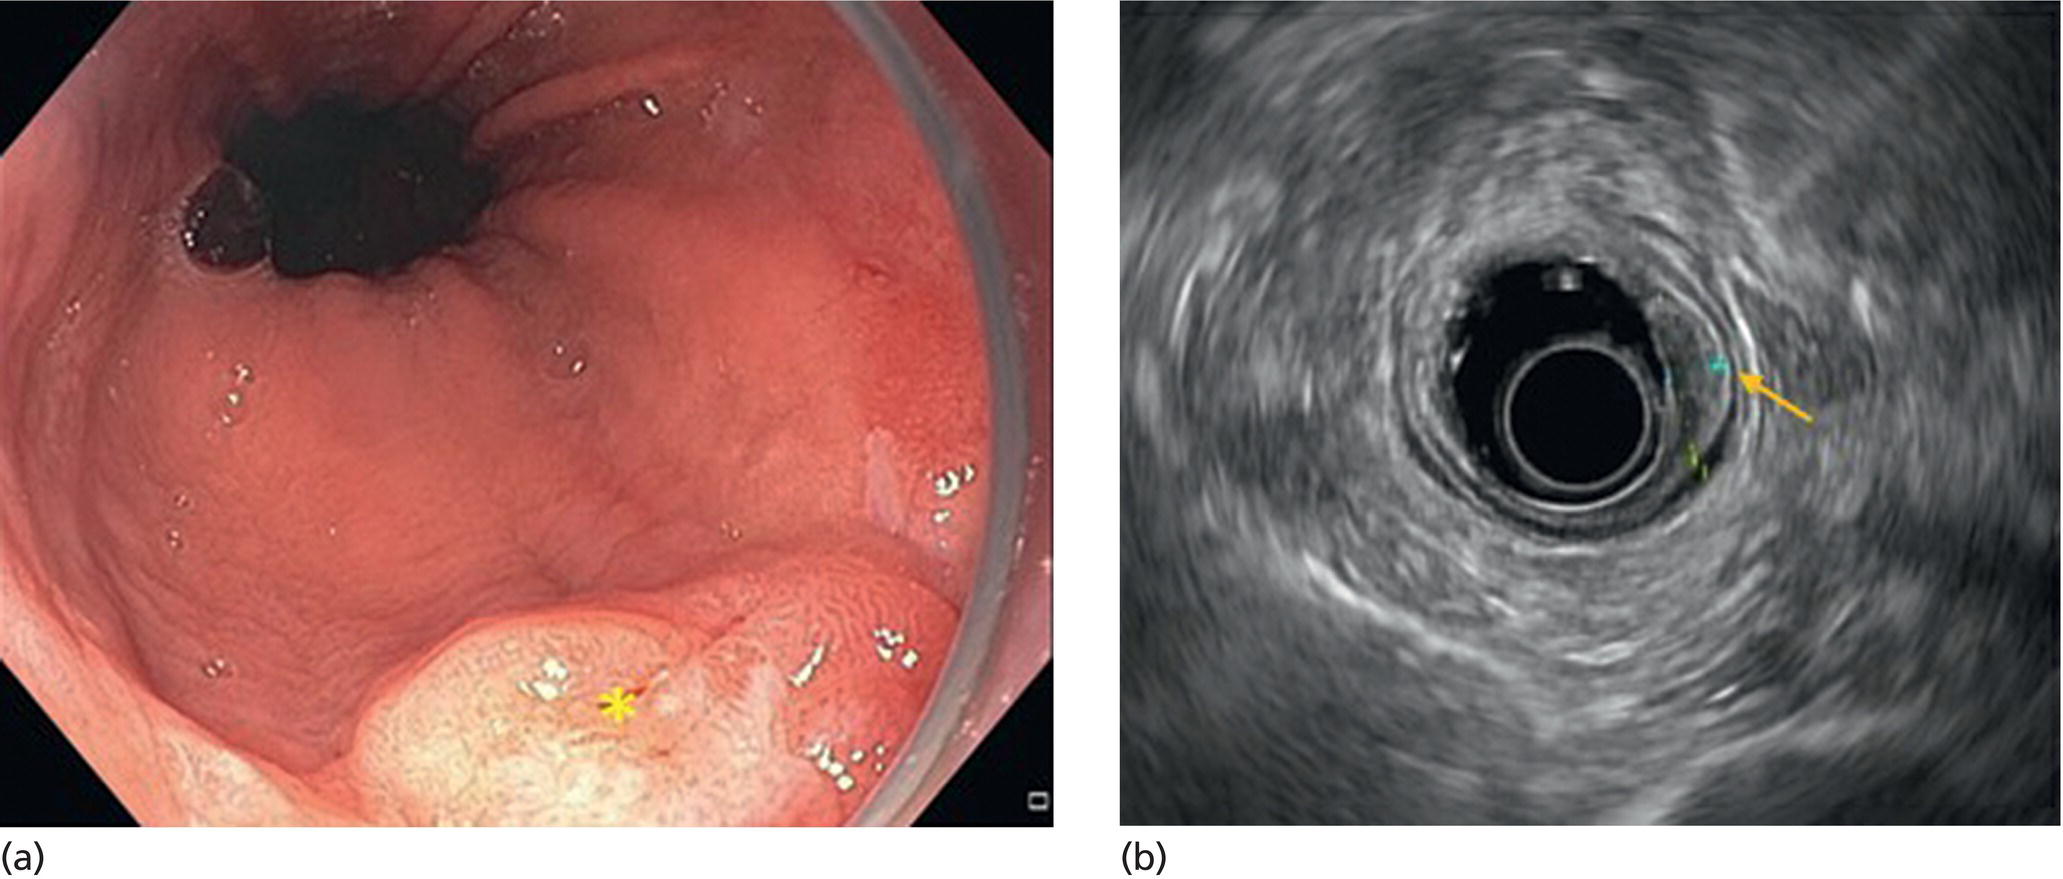 Photos depict (a) T1b adenocarcinoma at the gastroesophageal junction with central depression shown by asterisk. (b) EUS image showing submucosal invasion but no involvement of muscularis propria shown by yellow arrow.